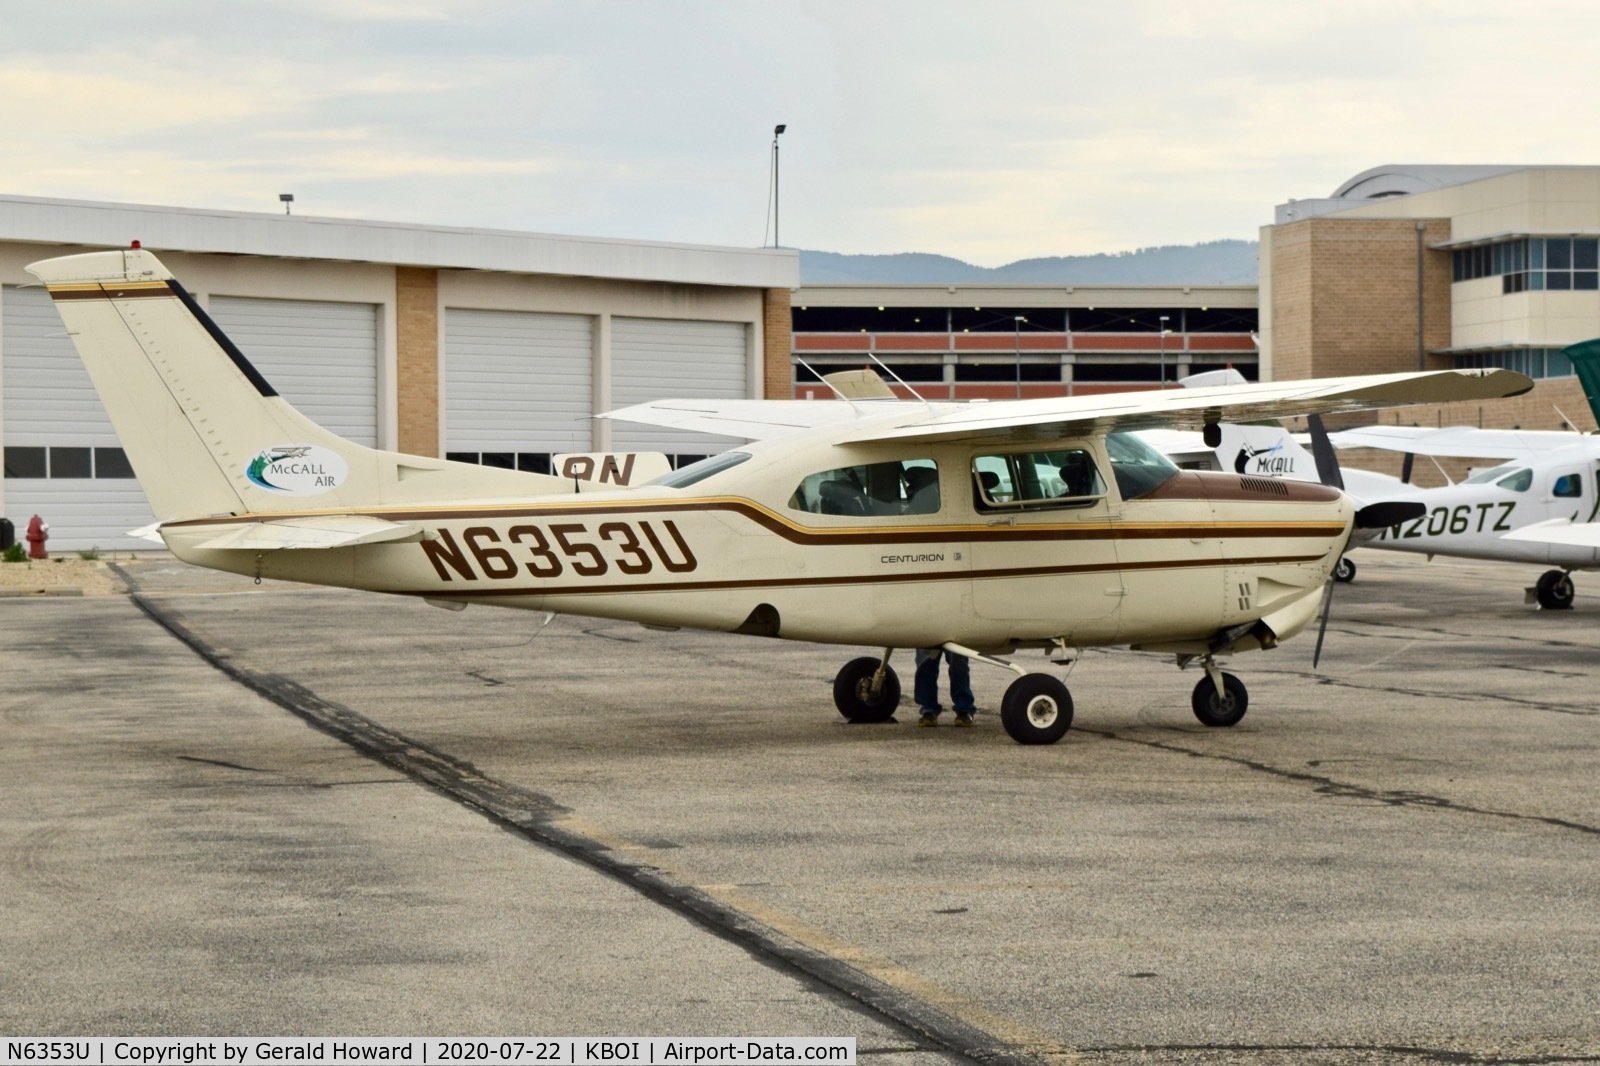 N6353U, 1985 Cessna T210R Turbo Centurion C/N 21064941, Parked on the back country ramp.